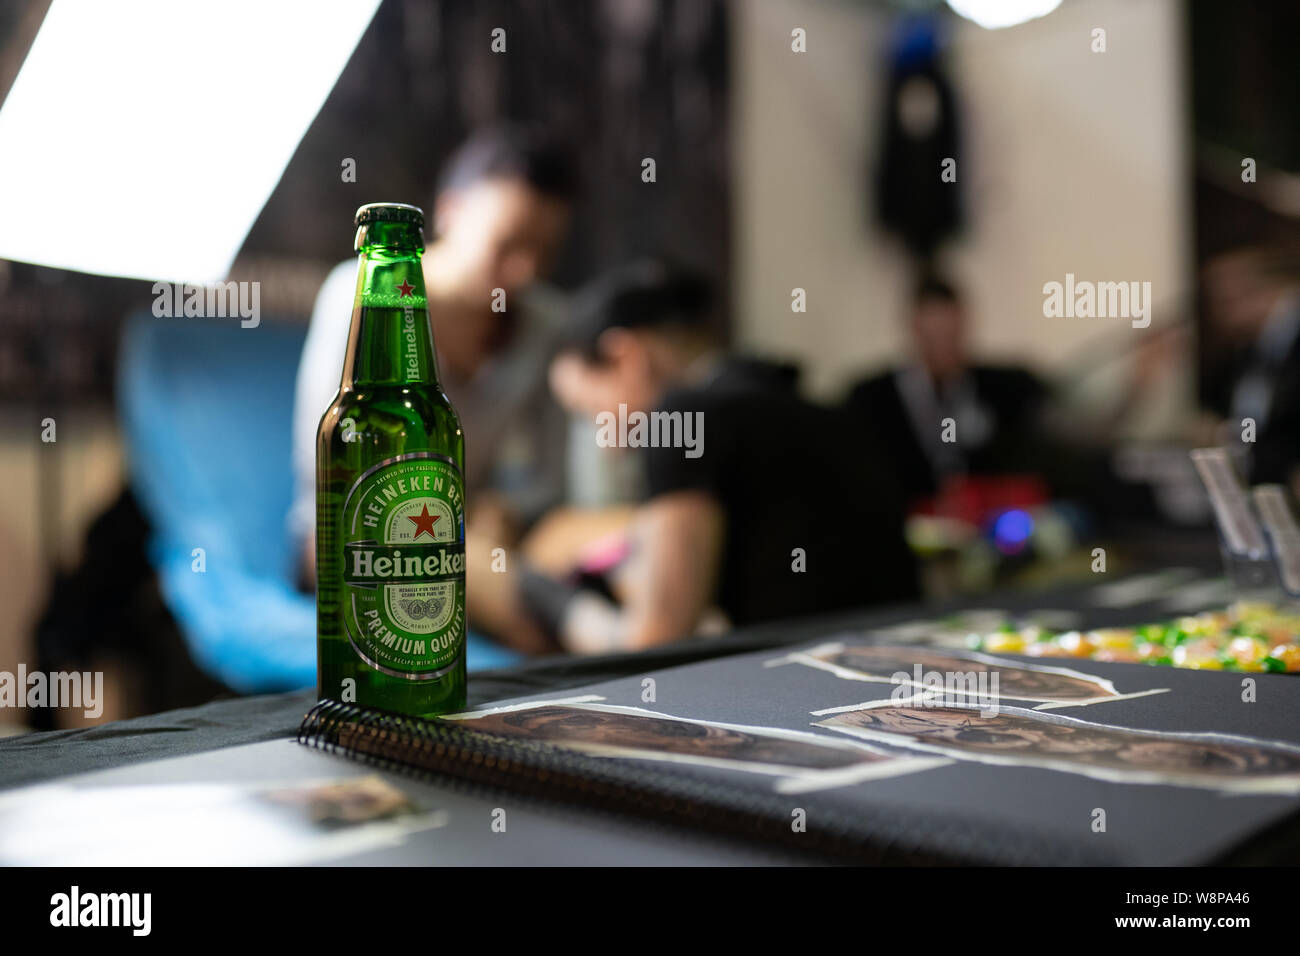 Leipzig saxonia germany february 02 2019: Tattoo convention: bottle heineken beer in front of a tattooing inking people. Stock Photo